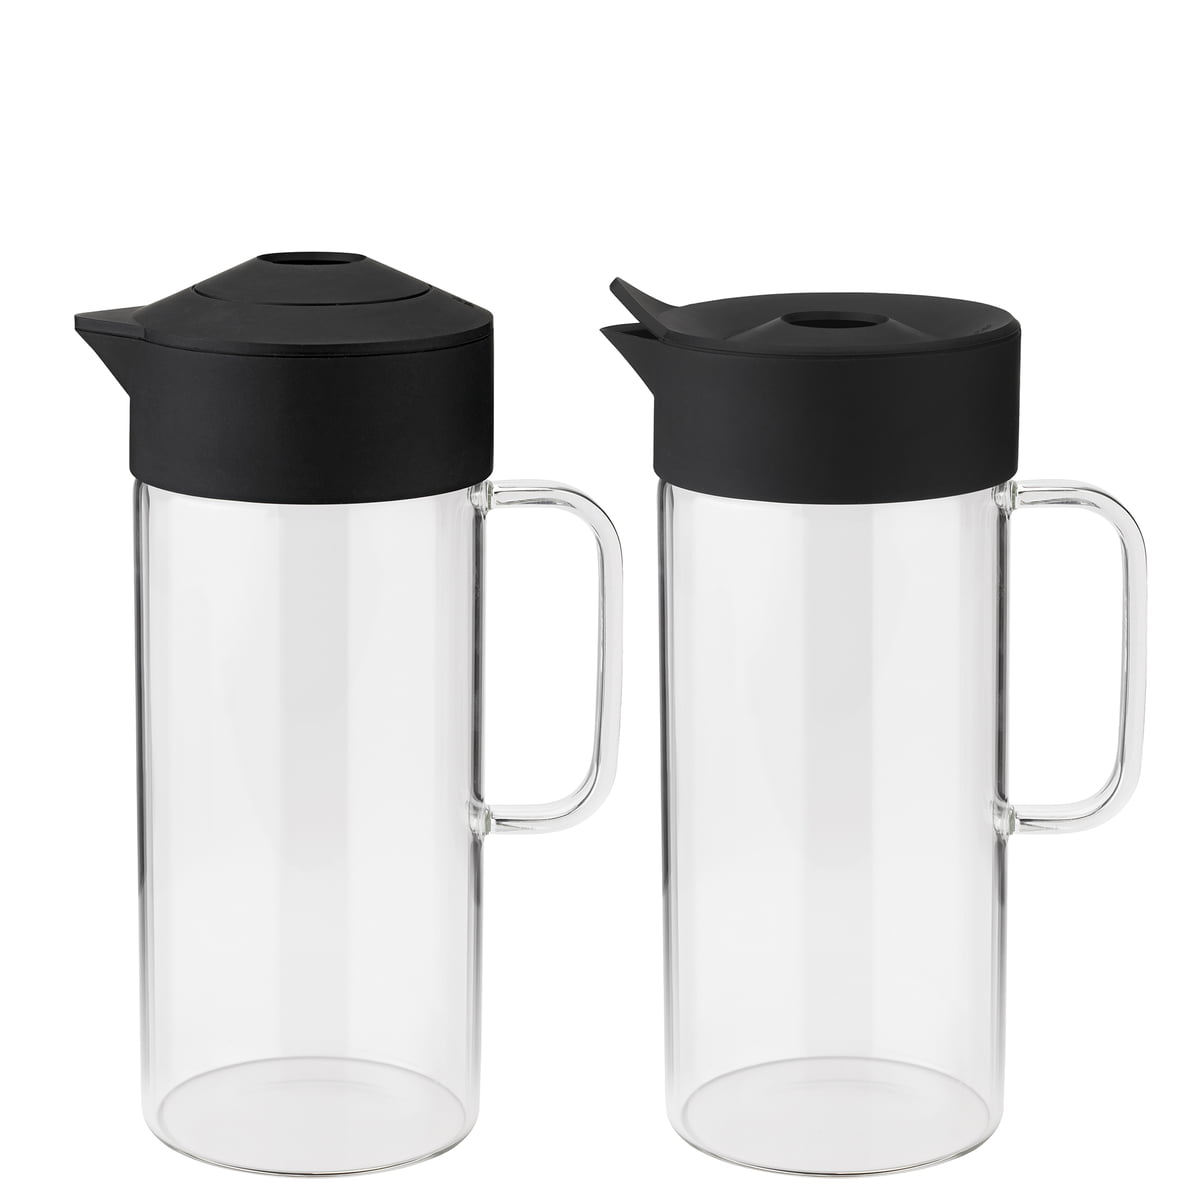 0.5l glass pitcher with handle, small